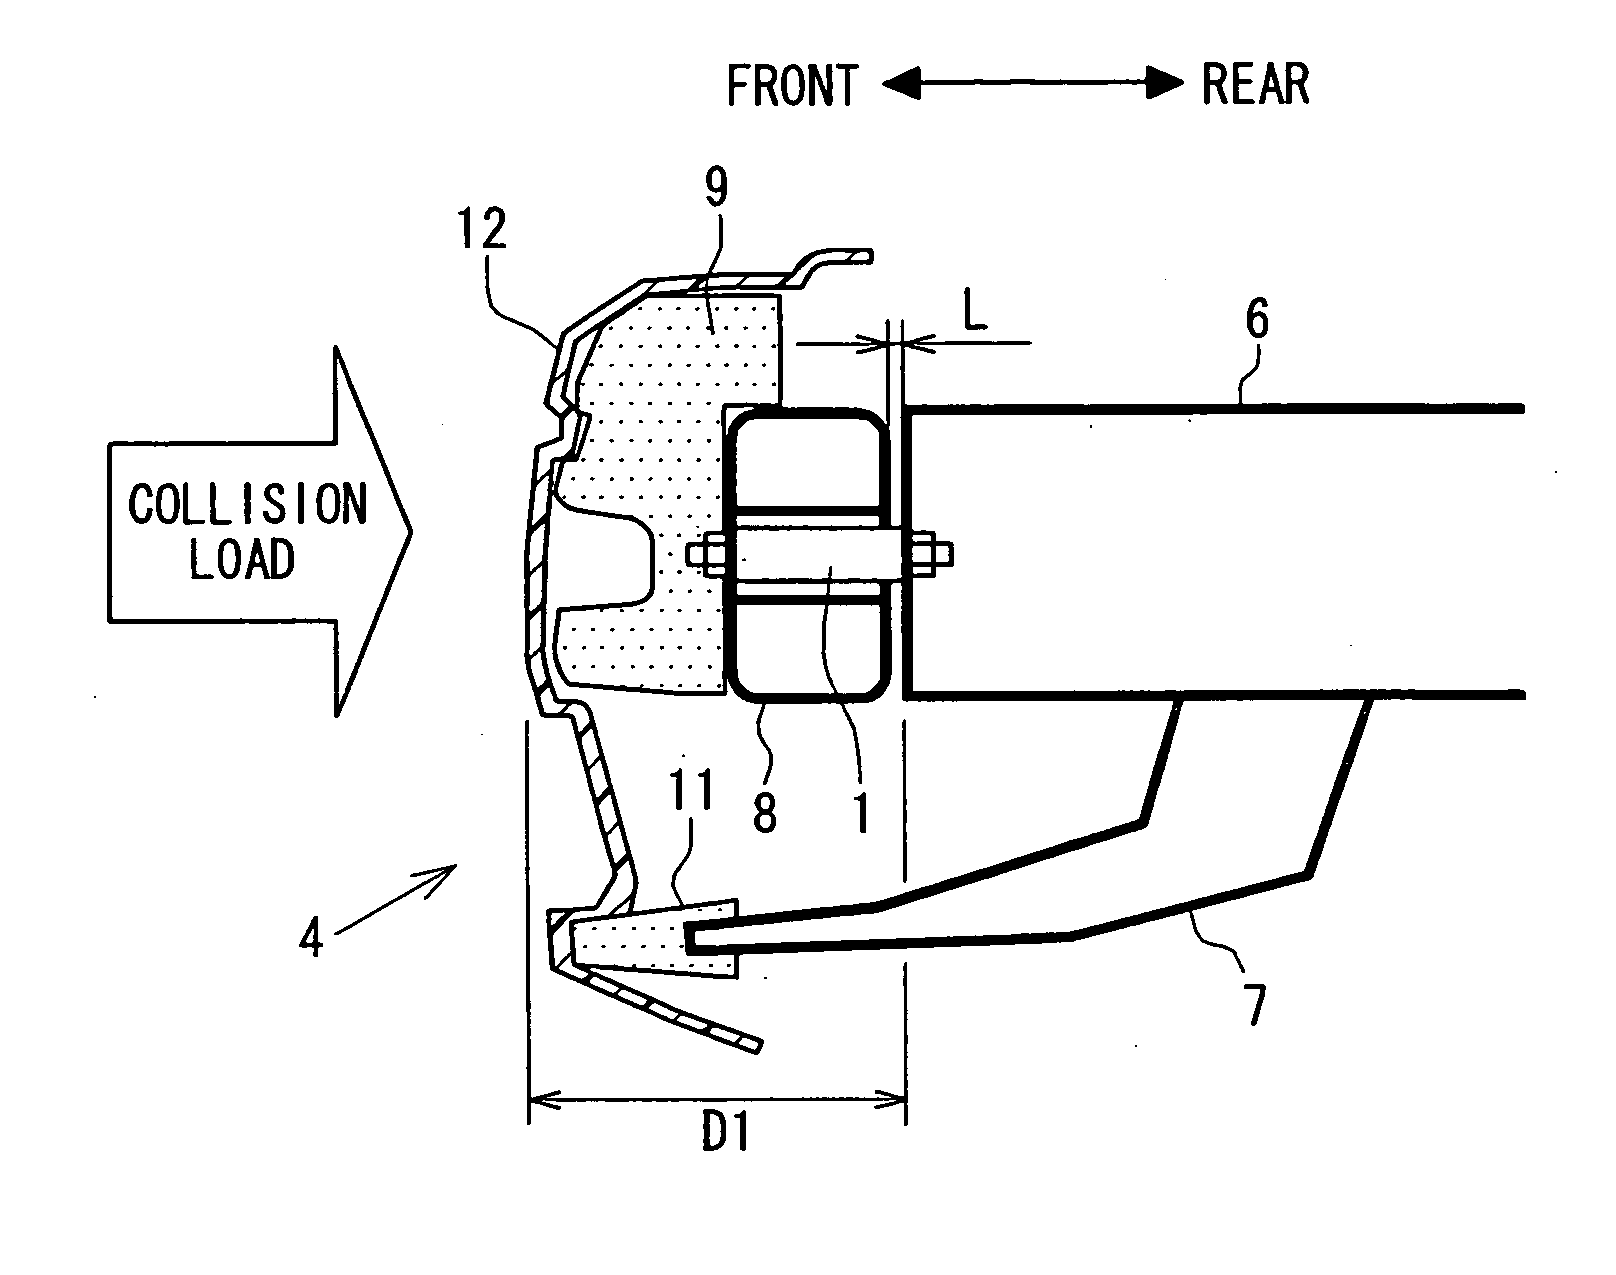 Collision object discrimination apparatus for vehicle